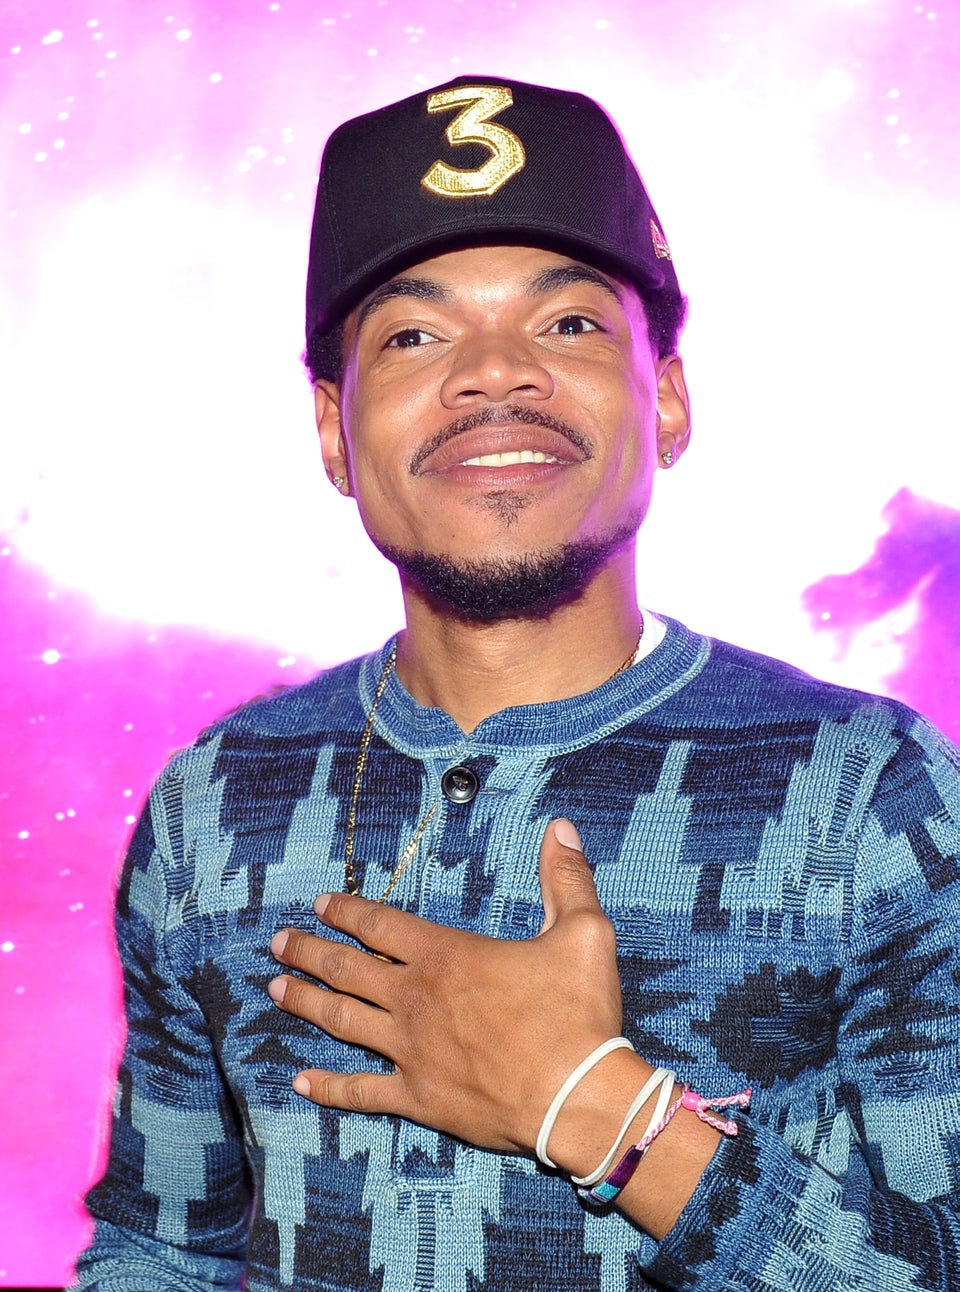 Fans Really Want Chance The Rapper To Be Mayor Of Chicago